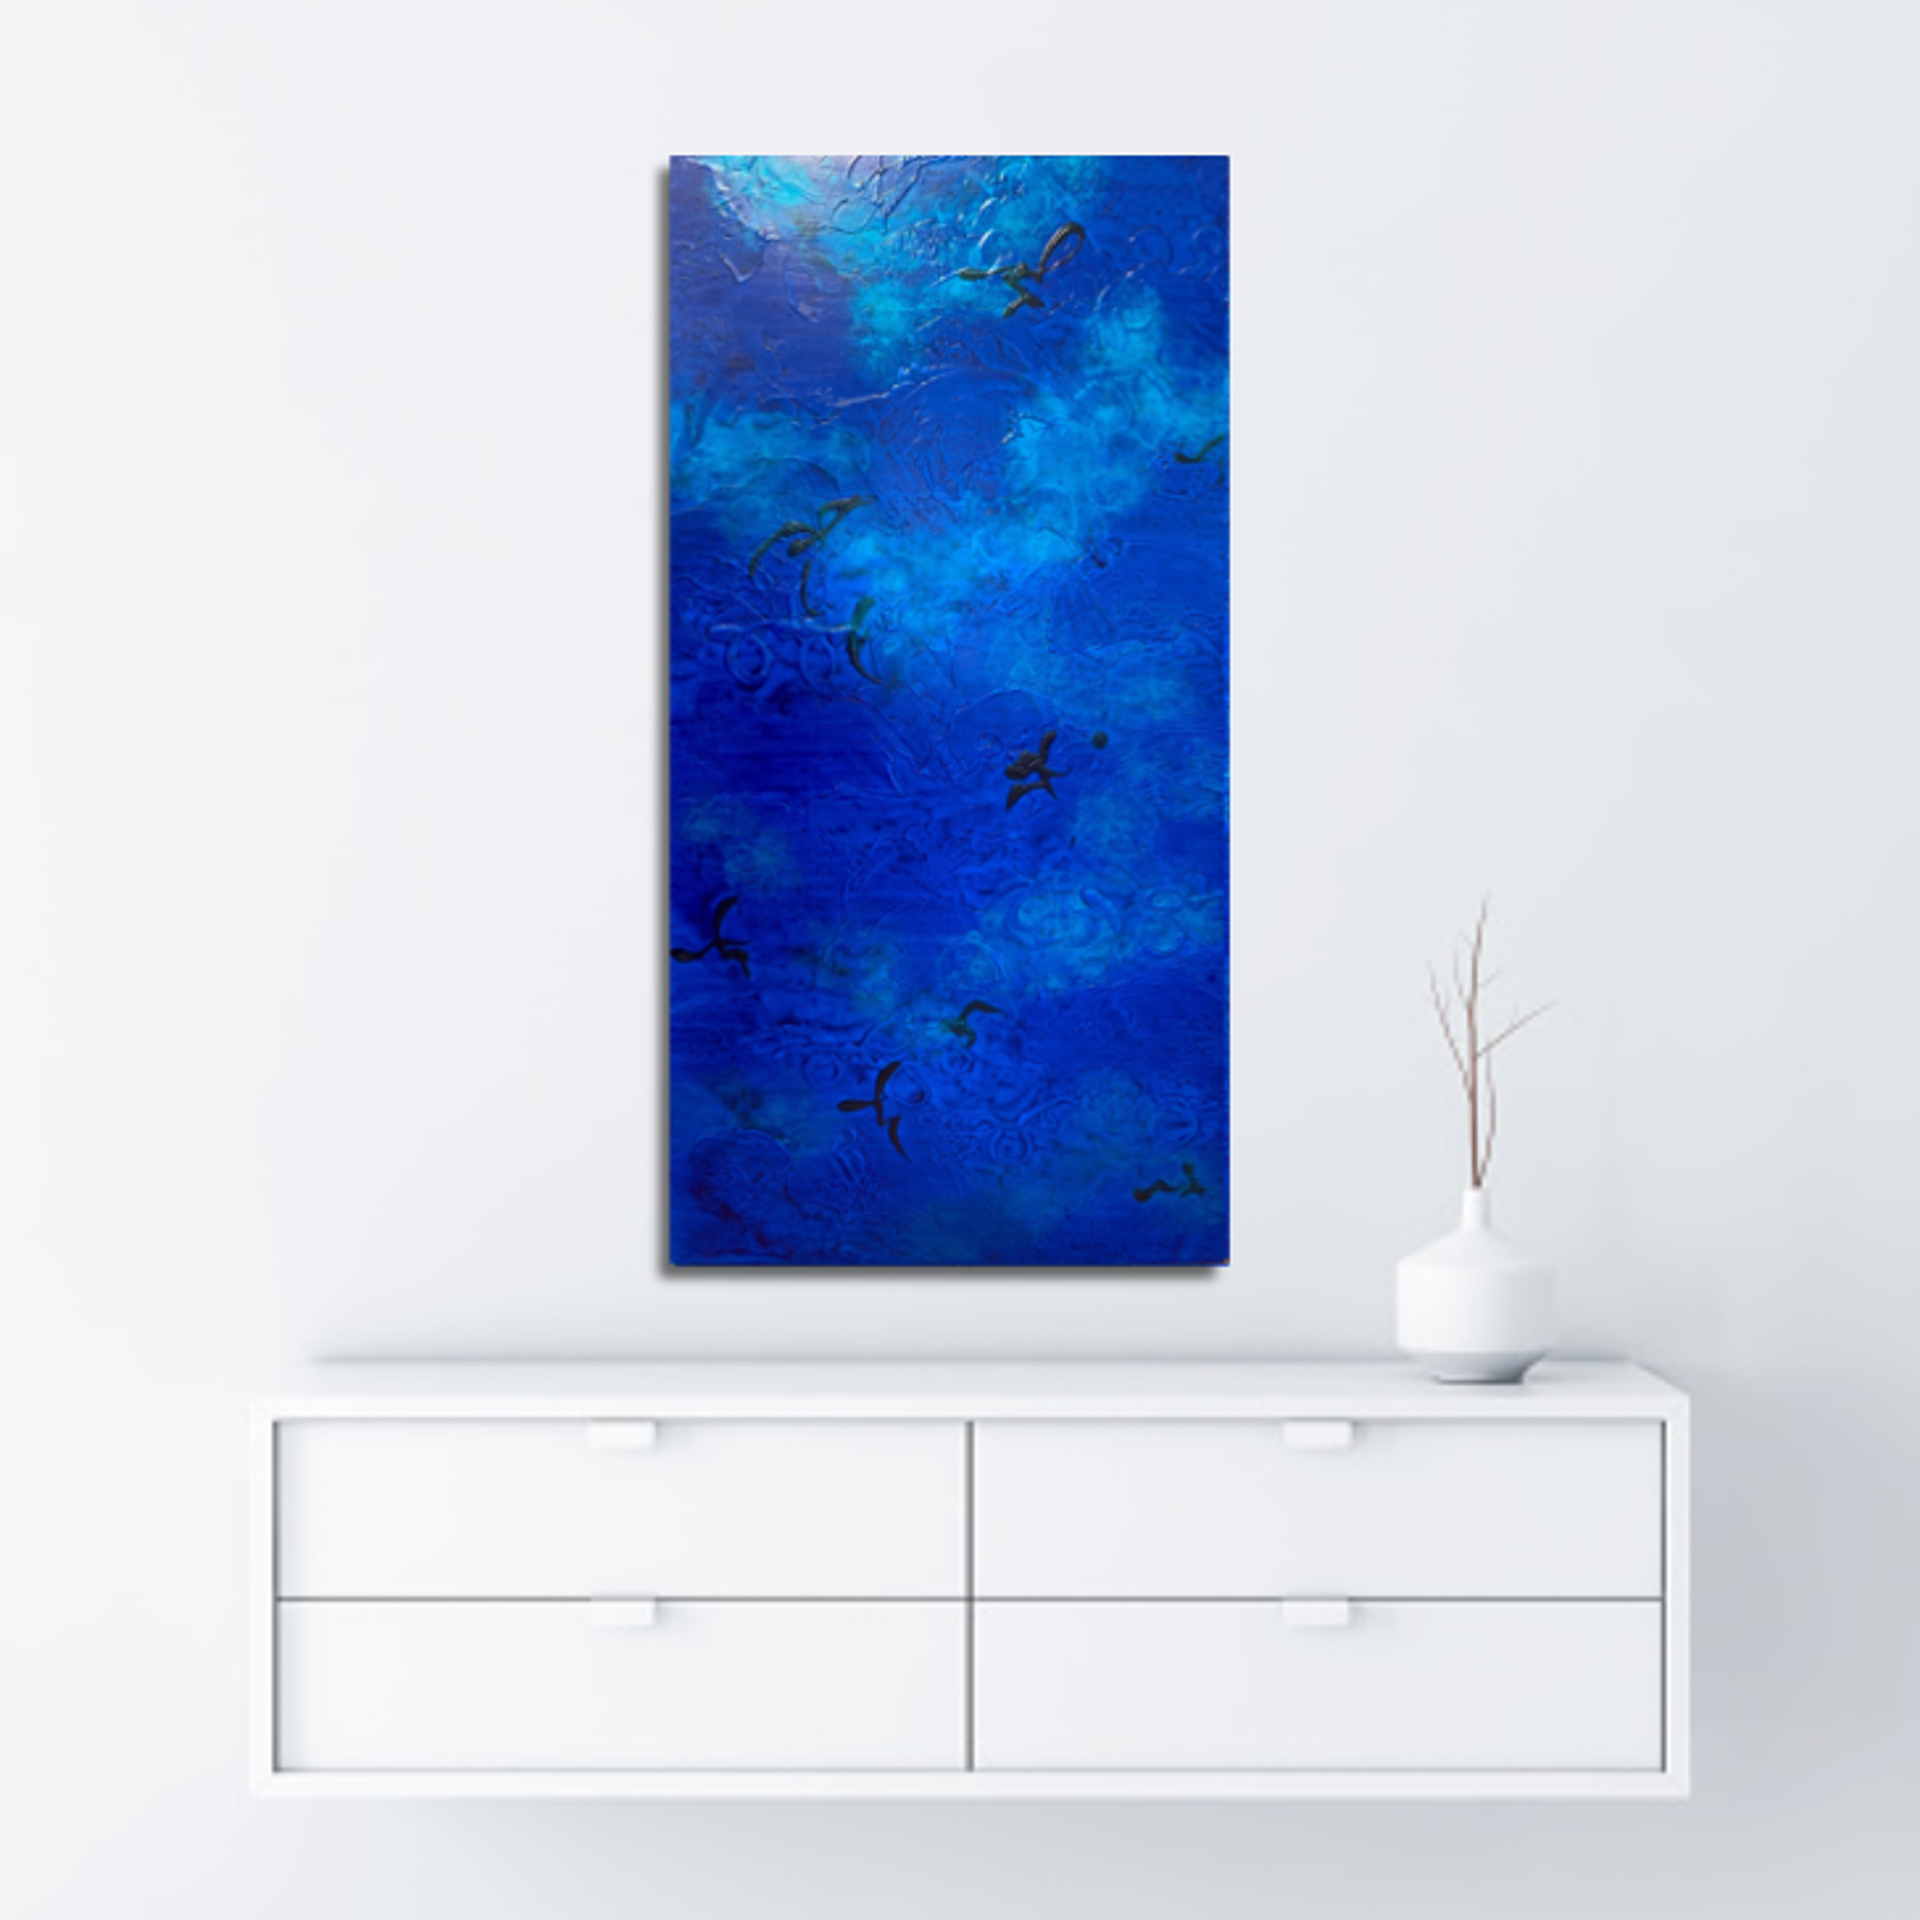 Dreams In Blue 3 (right) by Julie Quinn